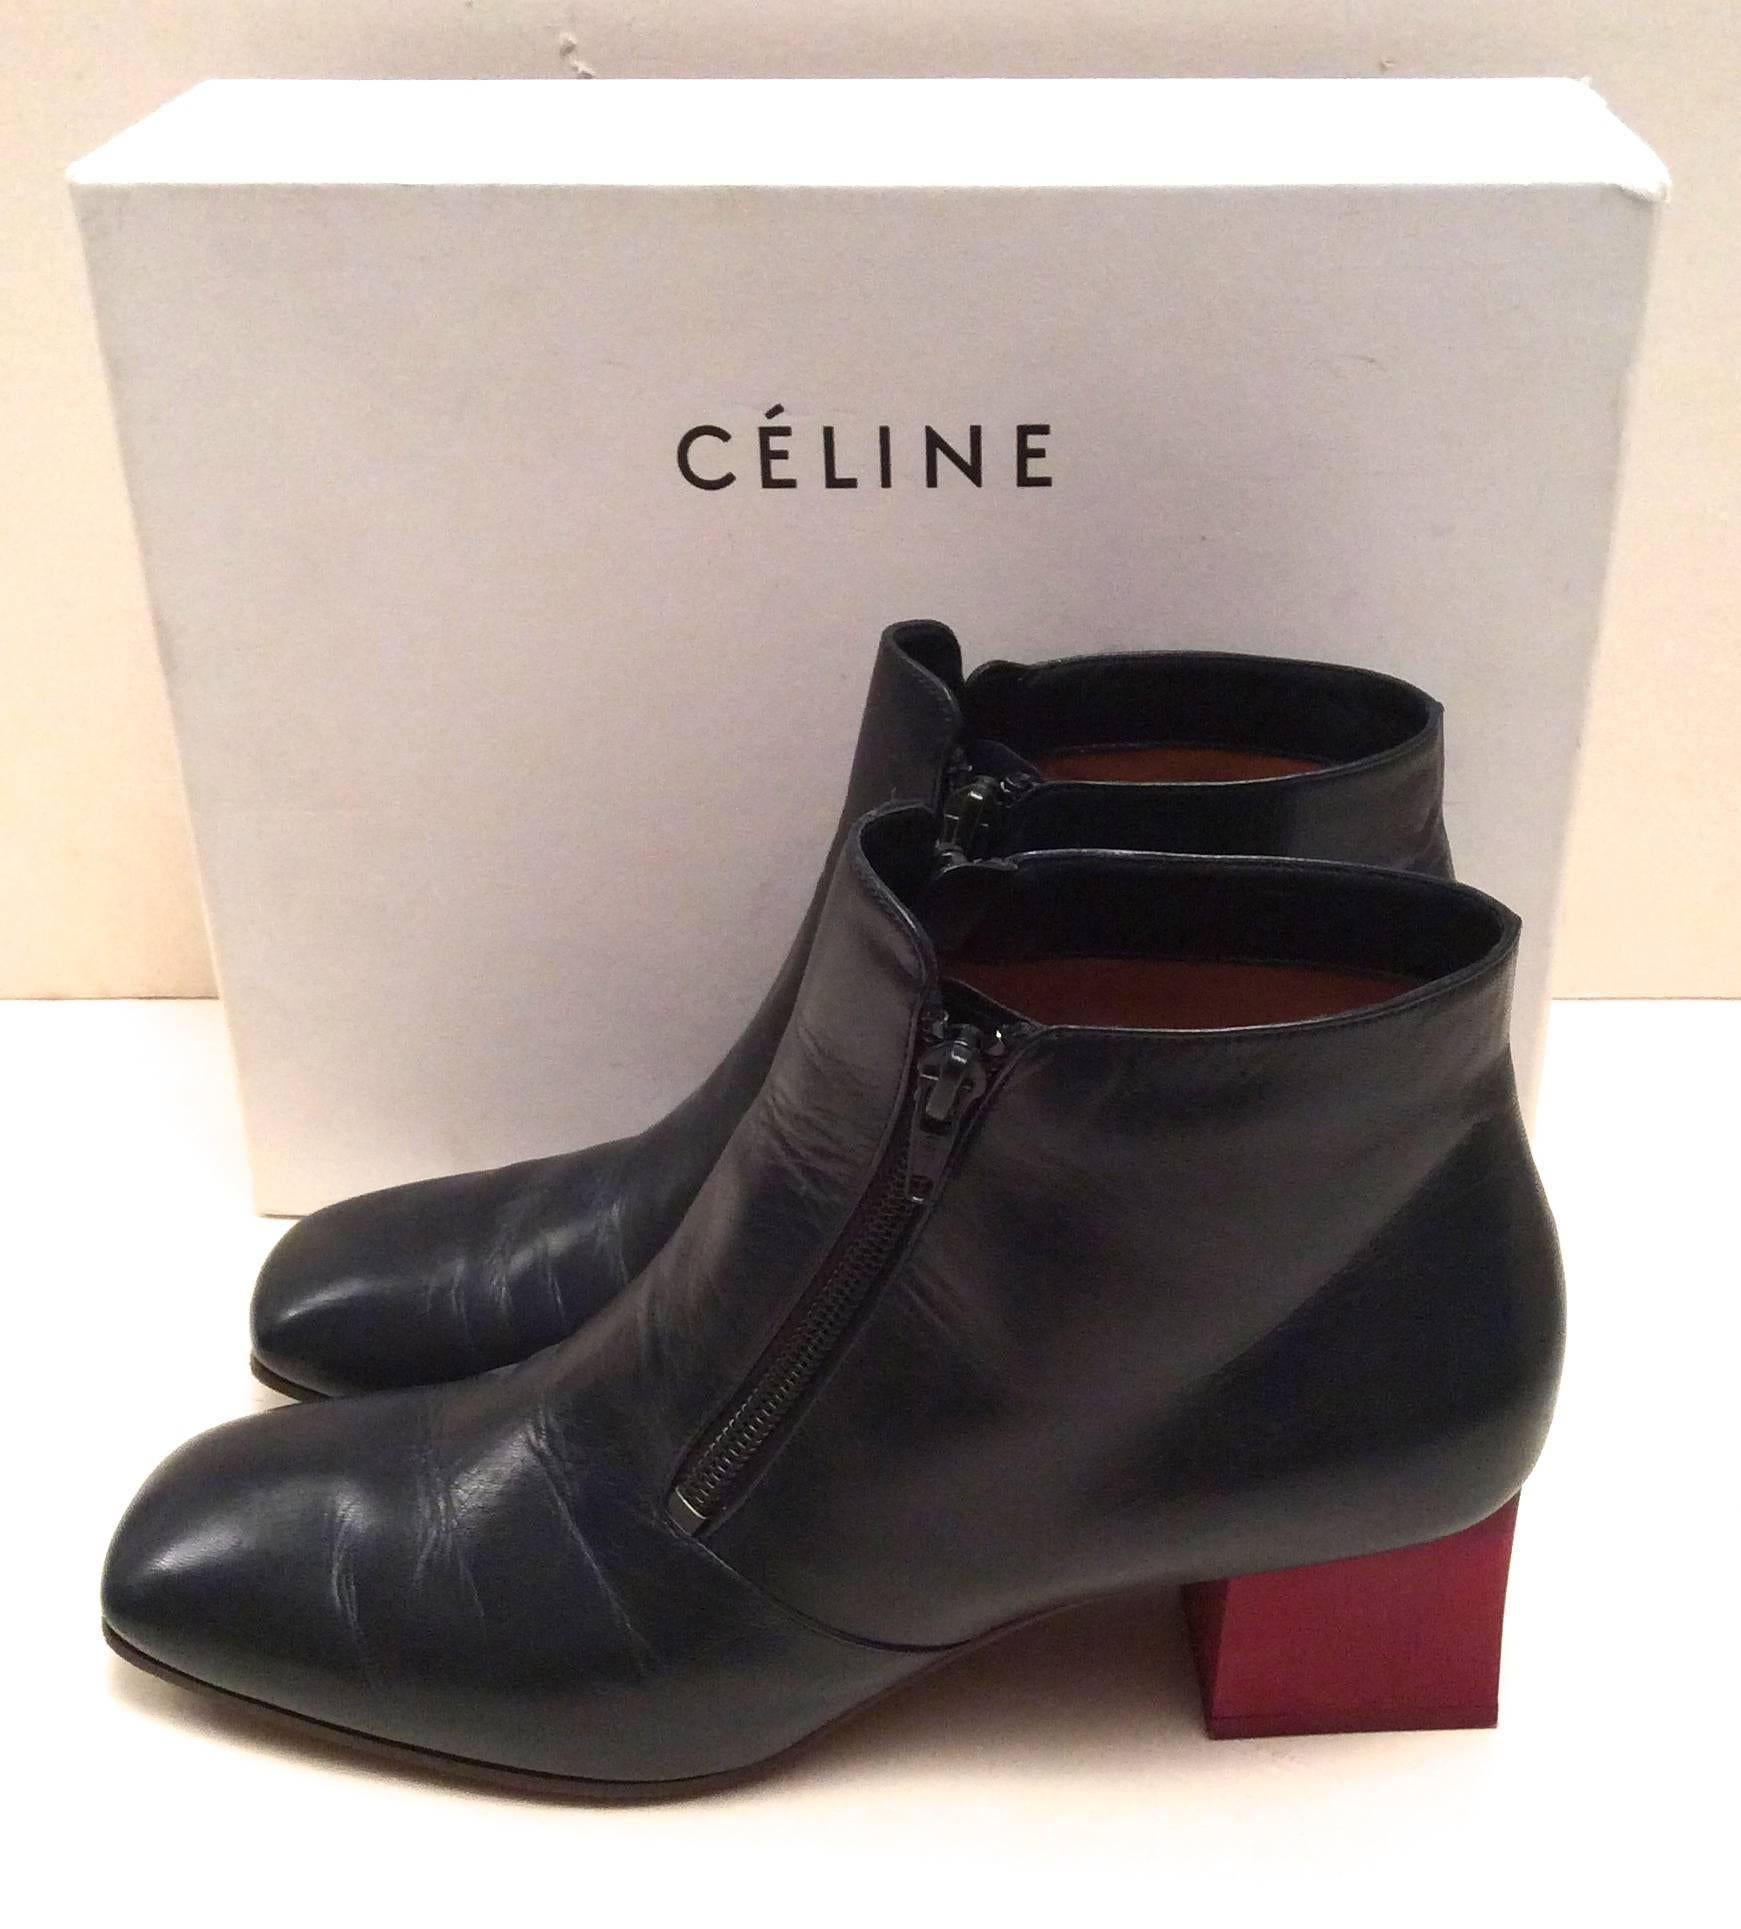 Celine Boots - Short Navy Leather with Red Heel - Size 37.5 In Excellent Condition For Sale In Boca Raton, FL